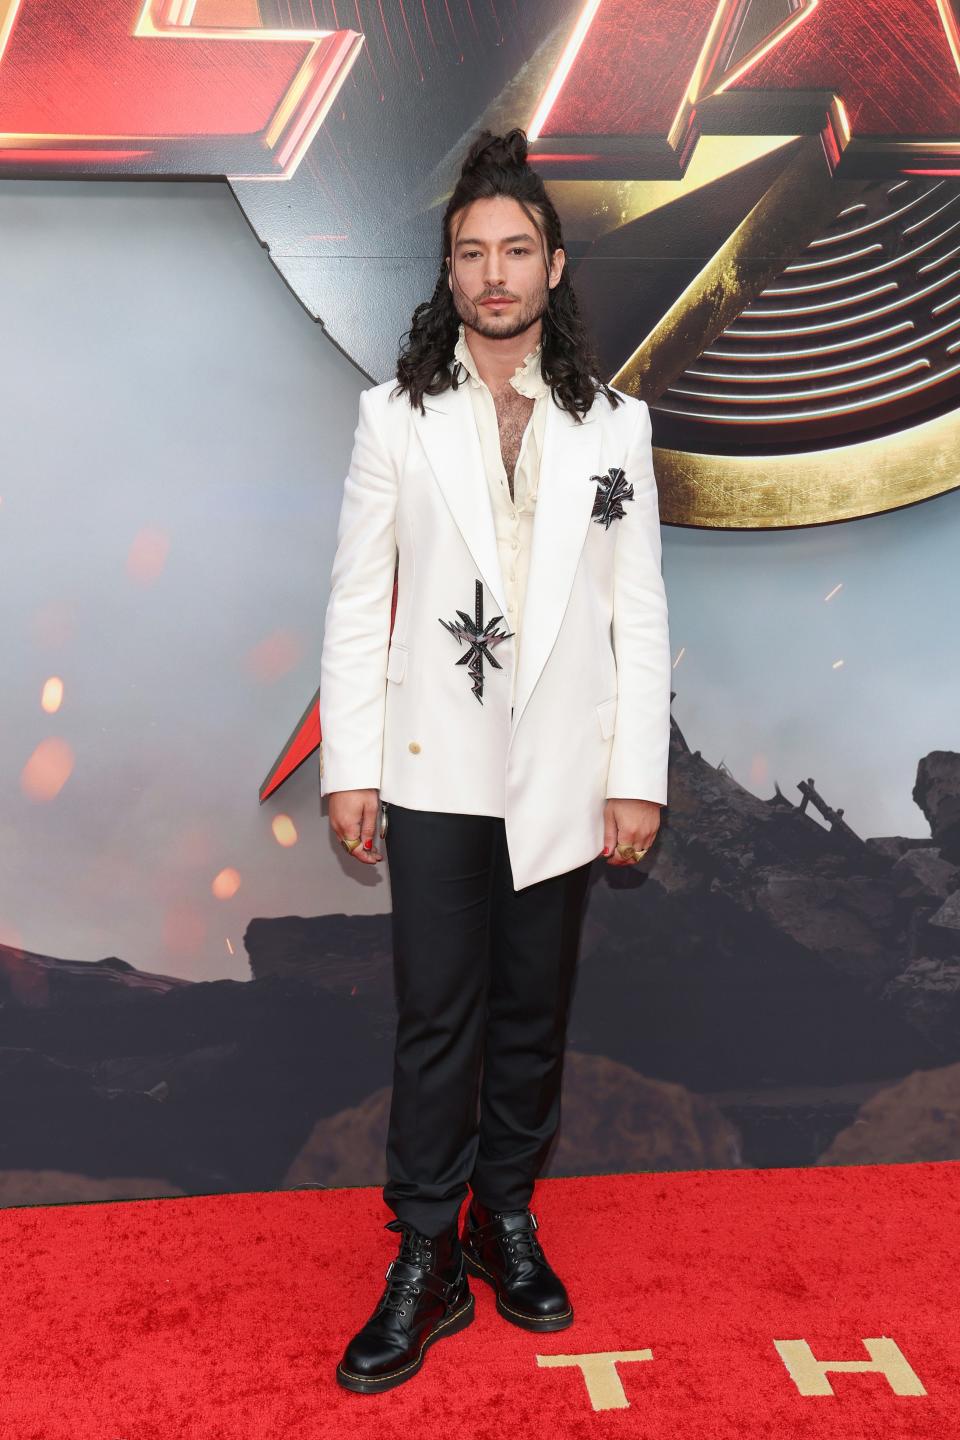 A protective order against Ezra Miller in Massachusetts was dropped on June 30.